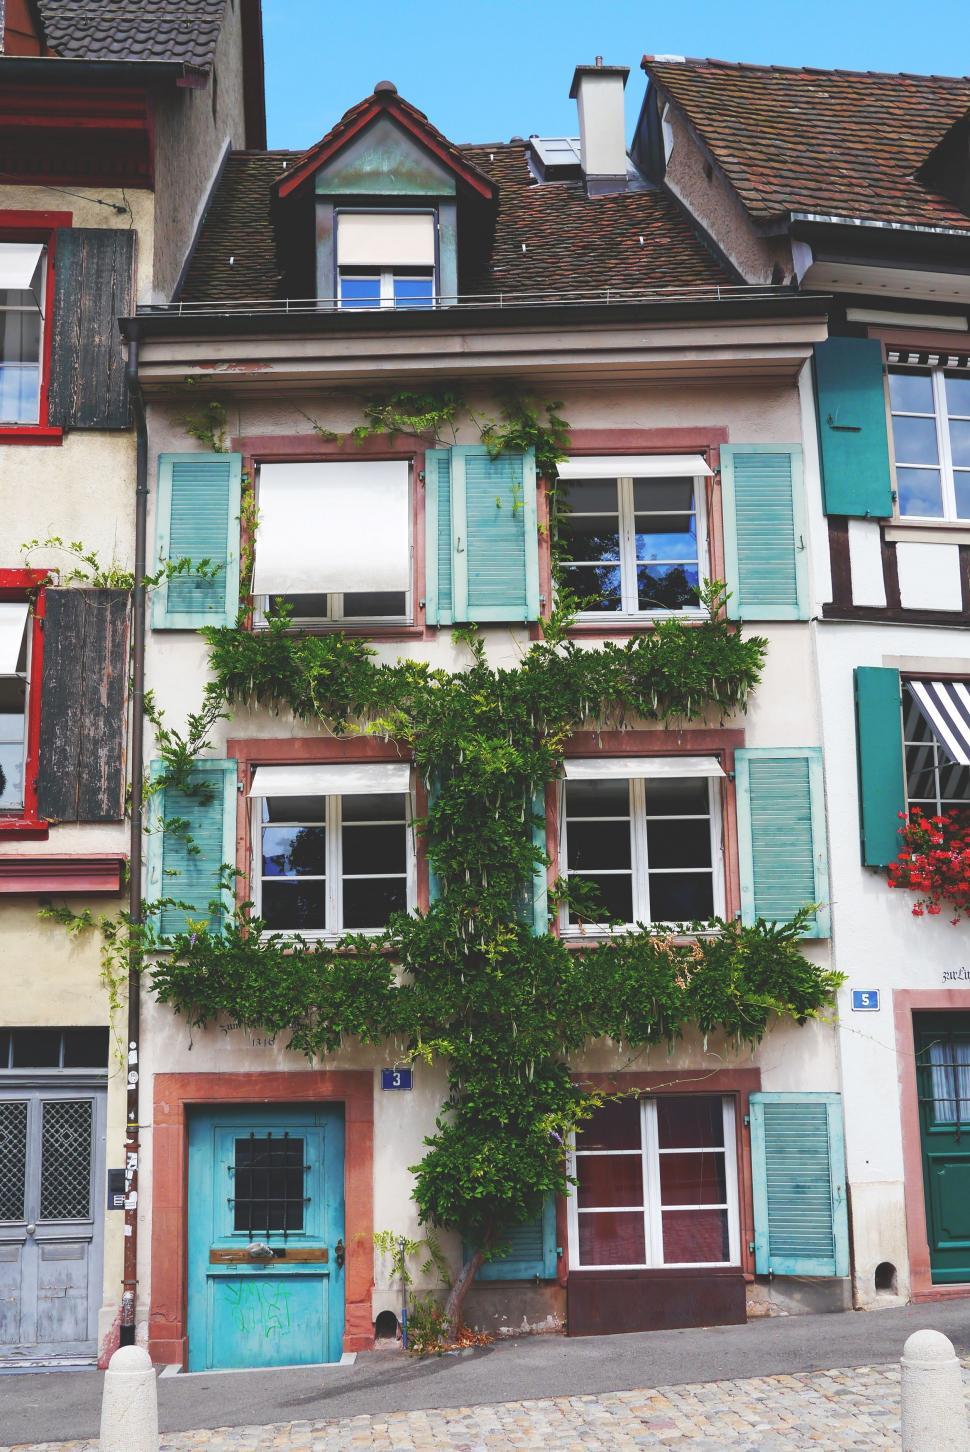 Free Image of Residential Houses with green climbing plant  